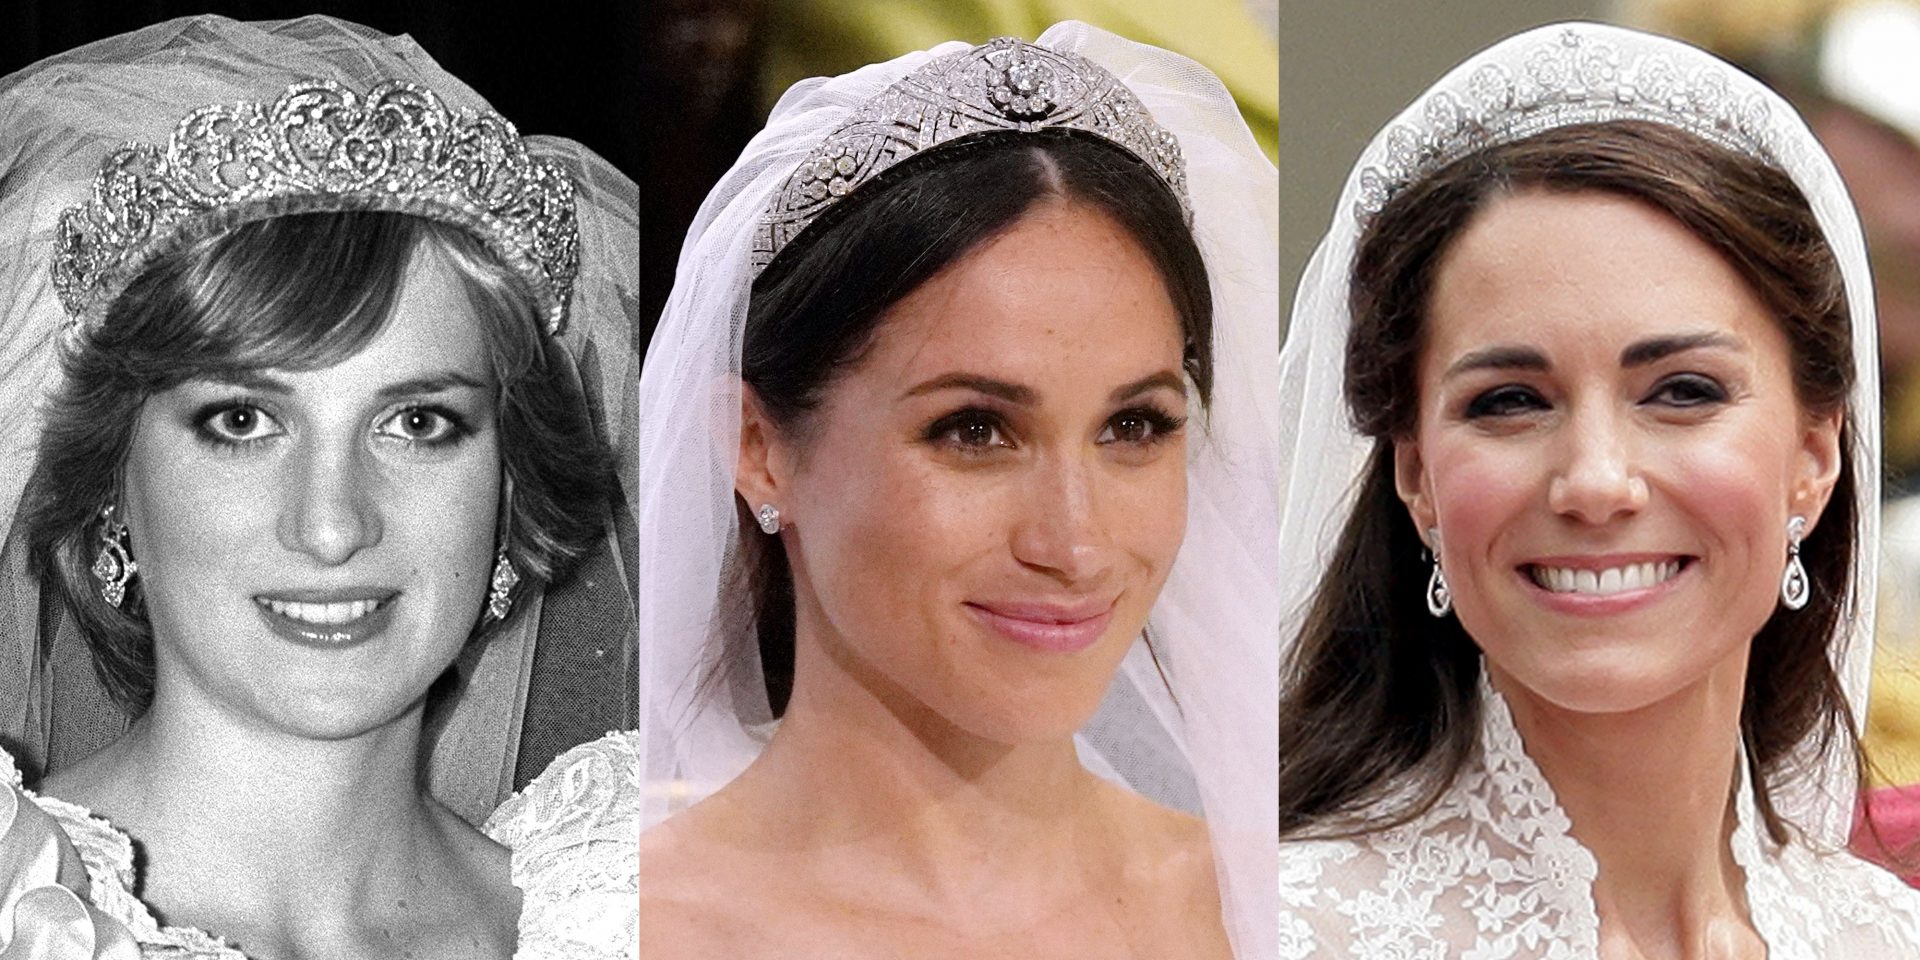 The Finest Royal Family Jewelry